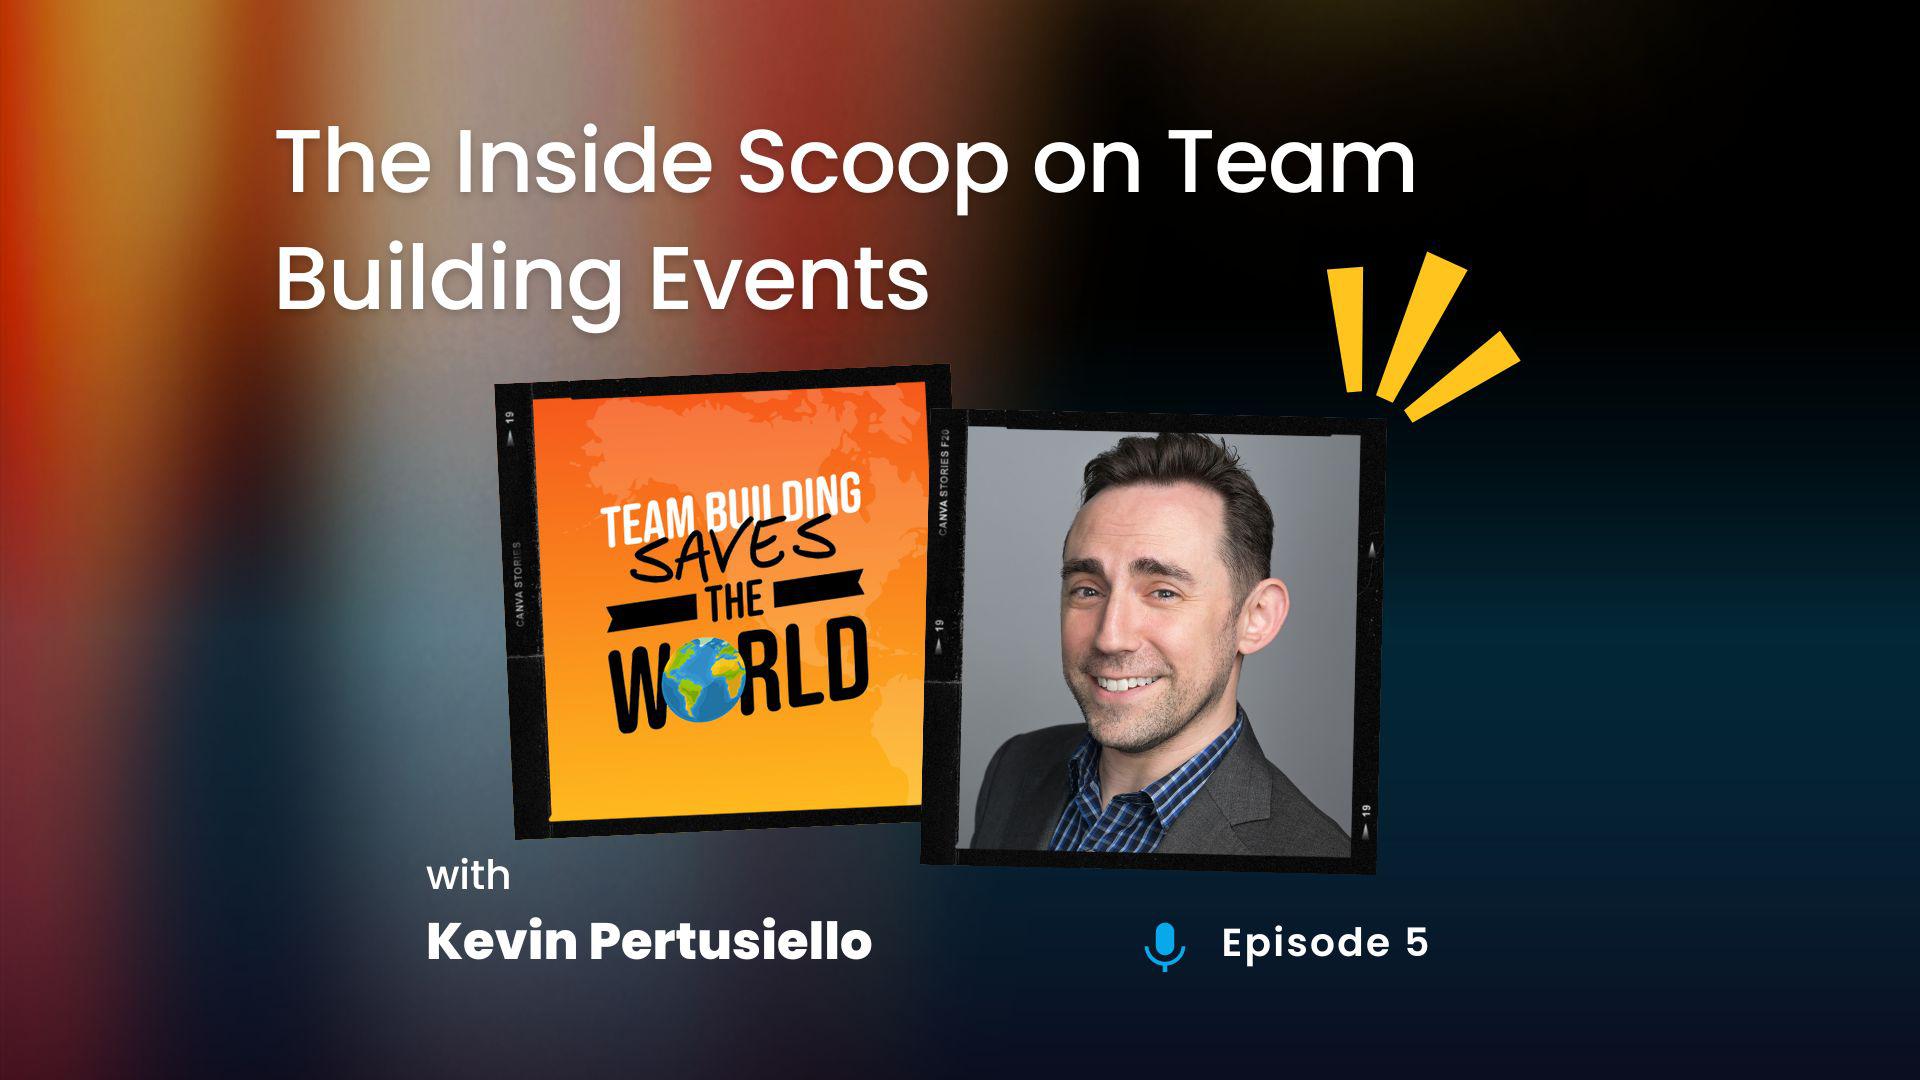 The Inside Scoop on Team Building Events